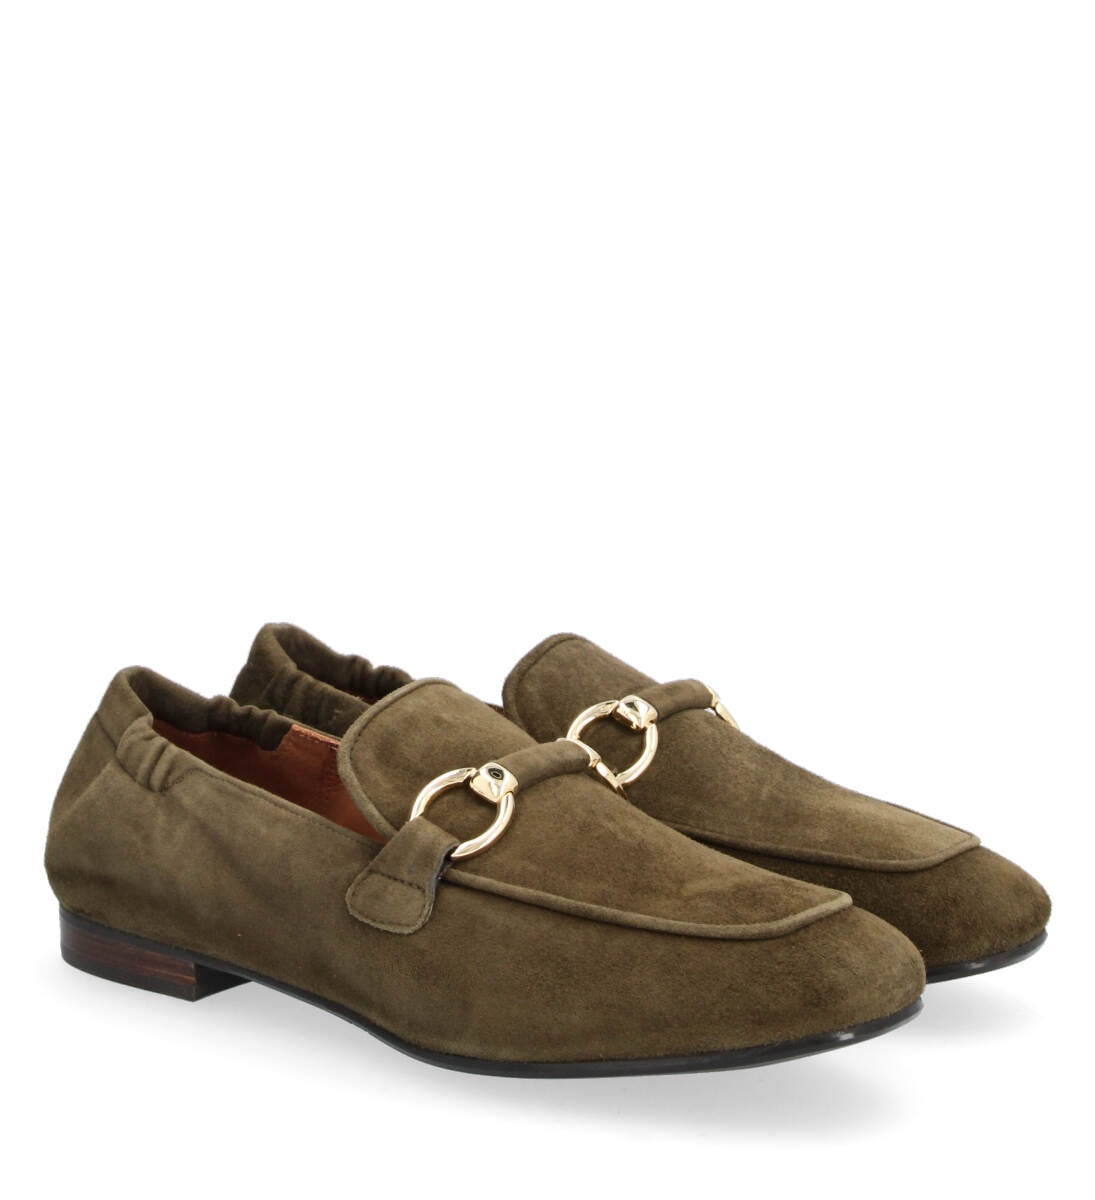 A1920 Loafers, Army Suede, 36